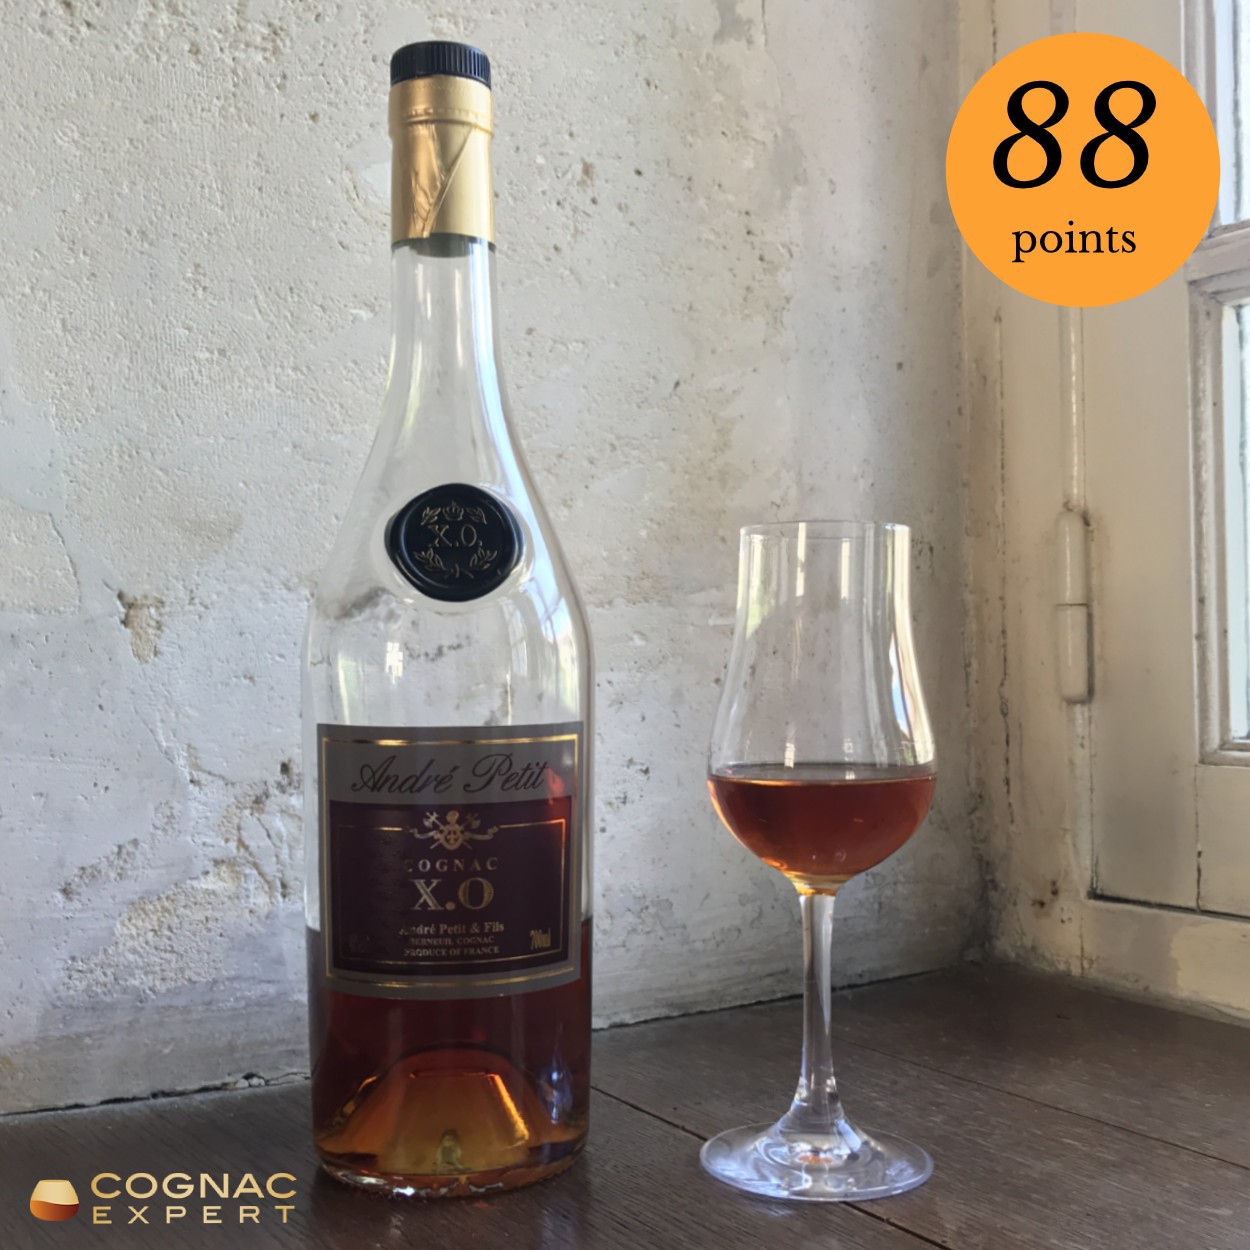 Andre Petite XO Cognac bottle and glass